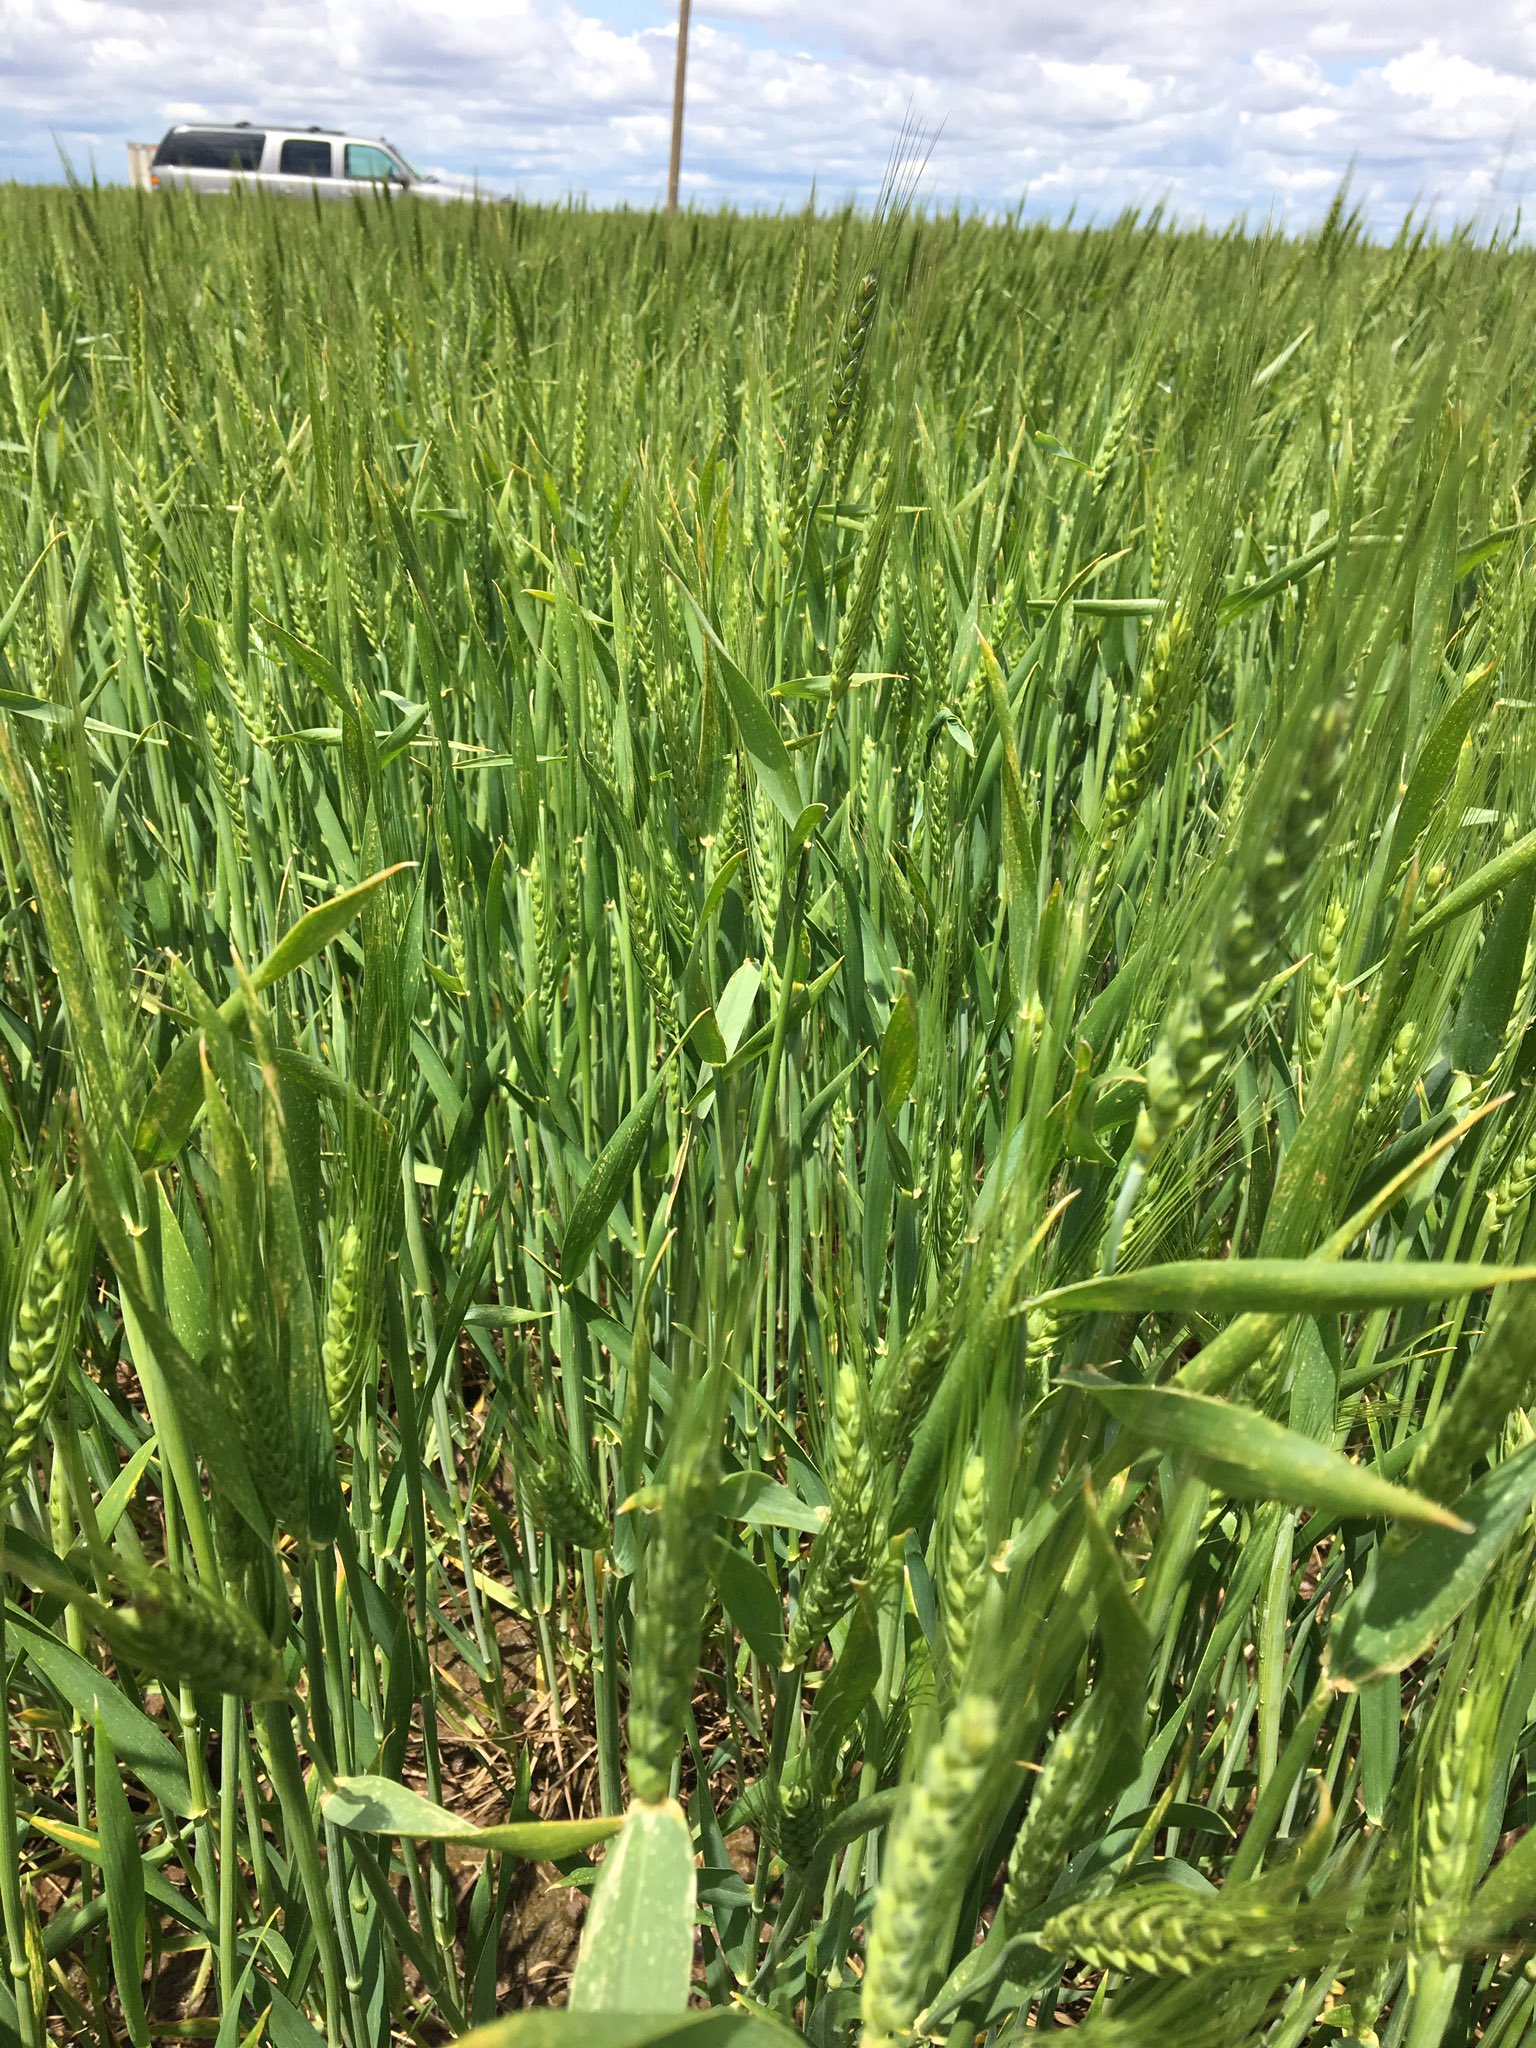 Western Kansas Wheat Remains an Unknown After Snow, Cold and Disease- Central Kansas Looks Good 